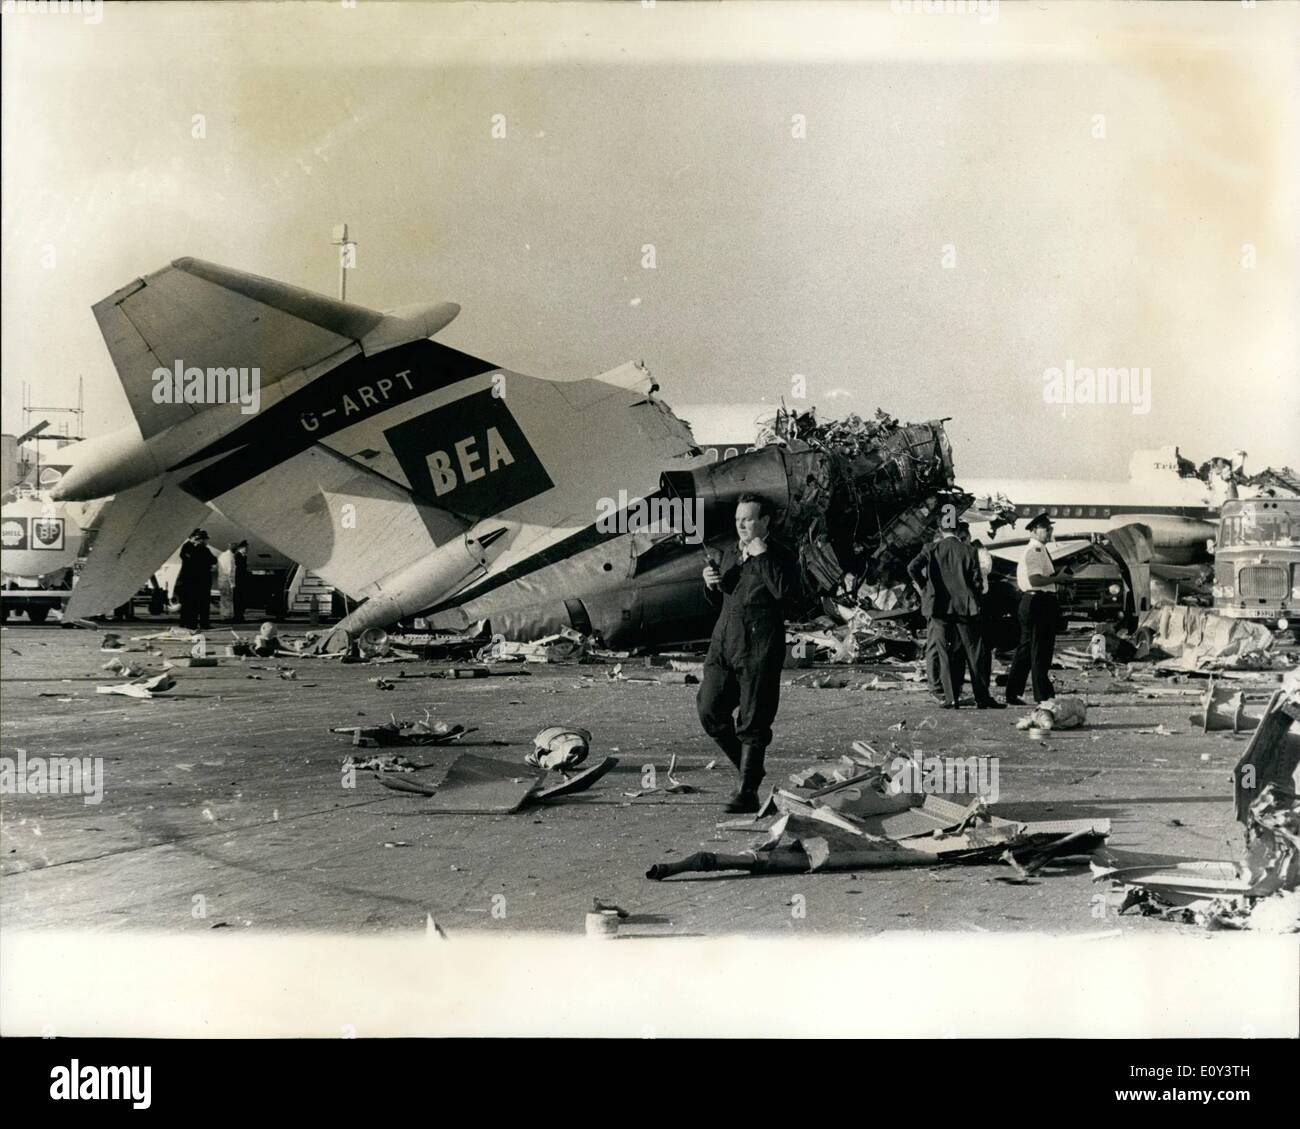 Jul. 07, 1968 - Six people die in air crash; Six people were killed and six injured as an Elizabethan freighter of BKS the independent airline, crashed on landing at Heathrow Airport yesterday. Struck three parked BEa airliners and smashed into the wall of a passenger building under construction. The crashed plane was returning eight brood mares and fosils from Deauville, France. to study farms in the South of England. The plane;s crow of three and three grooms on board died. All the hoses were killed or had to be destroyed Stock Photo